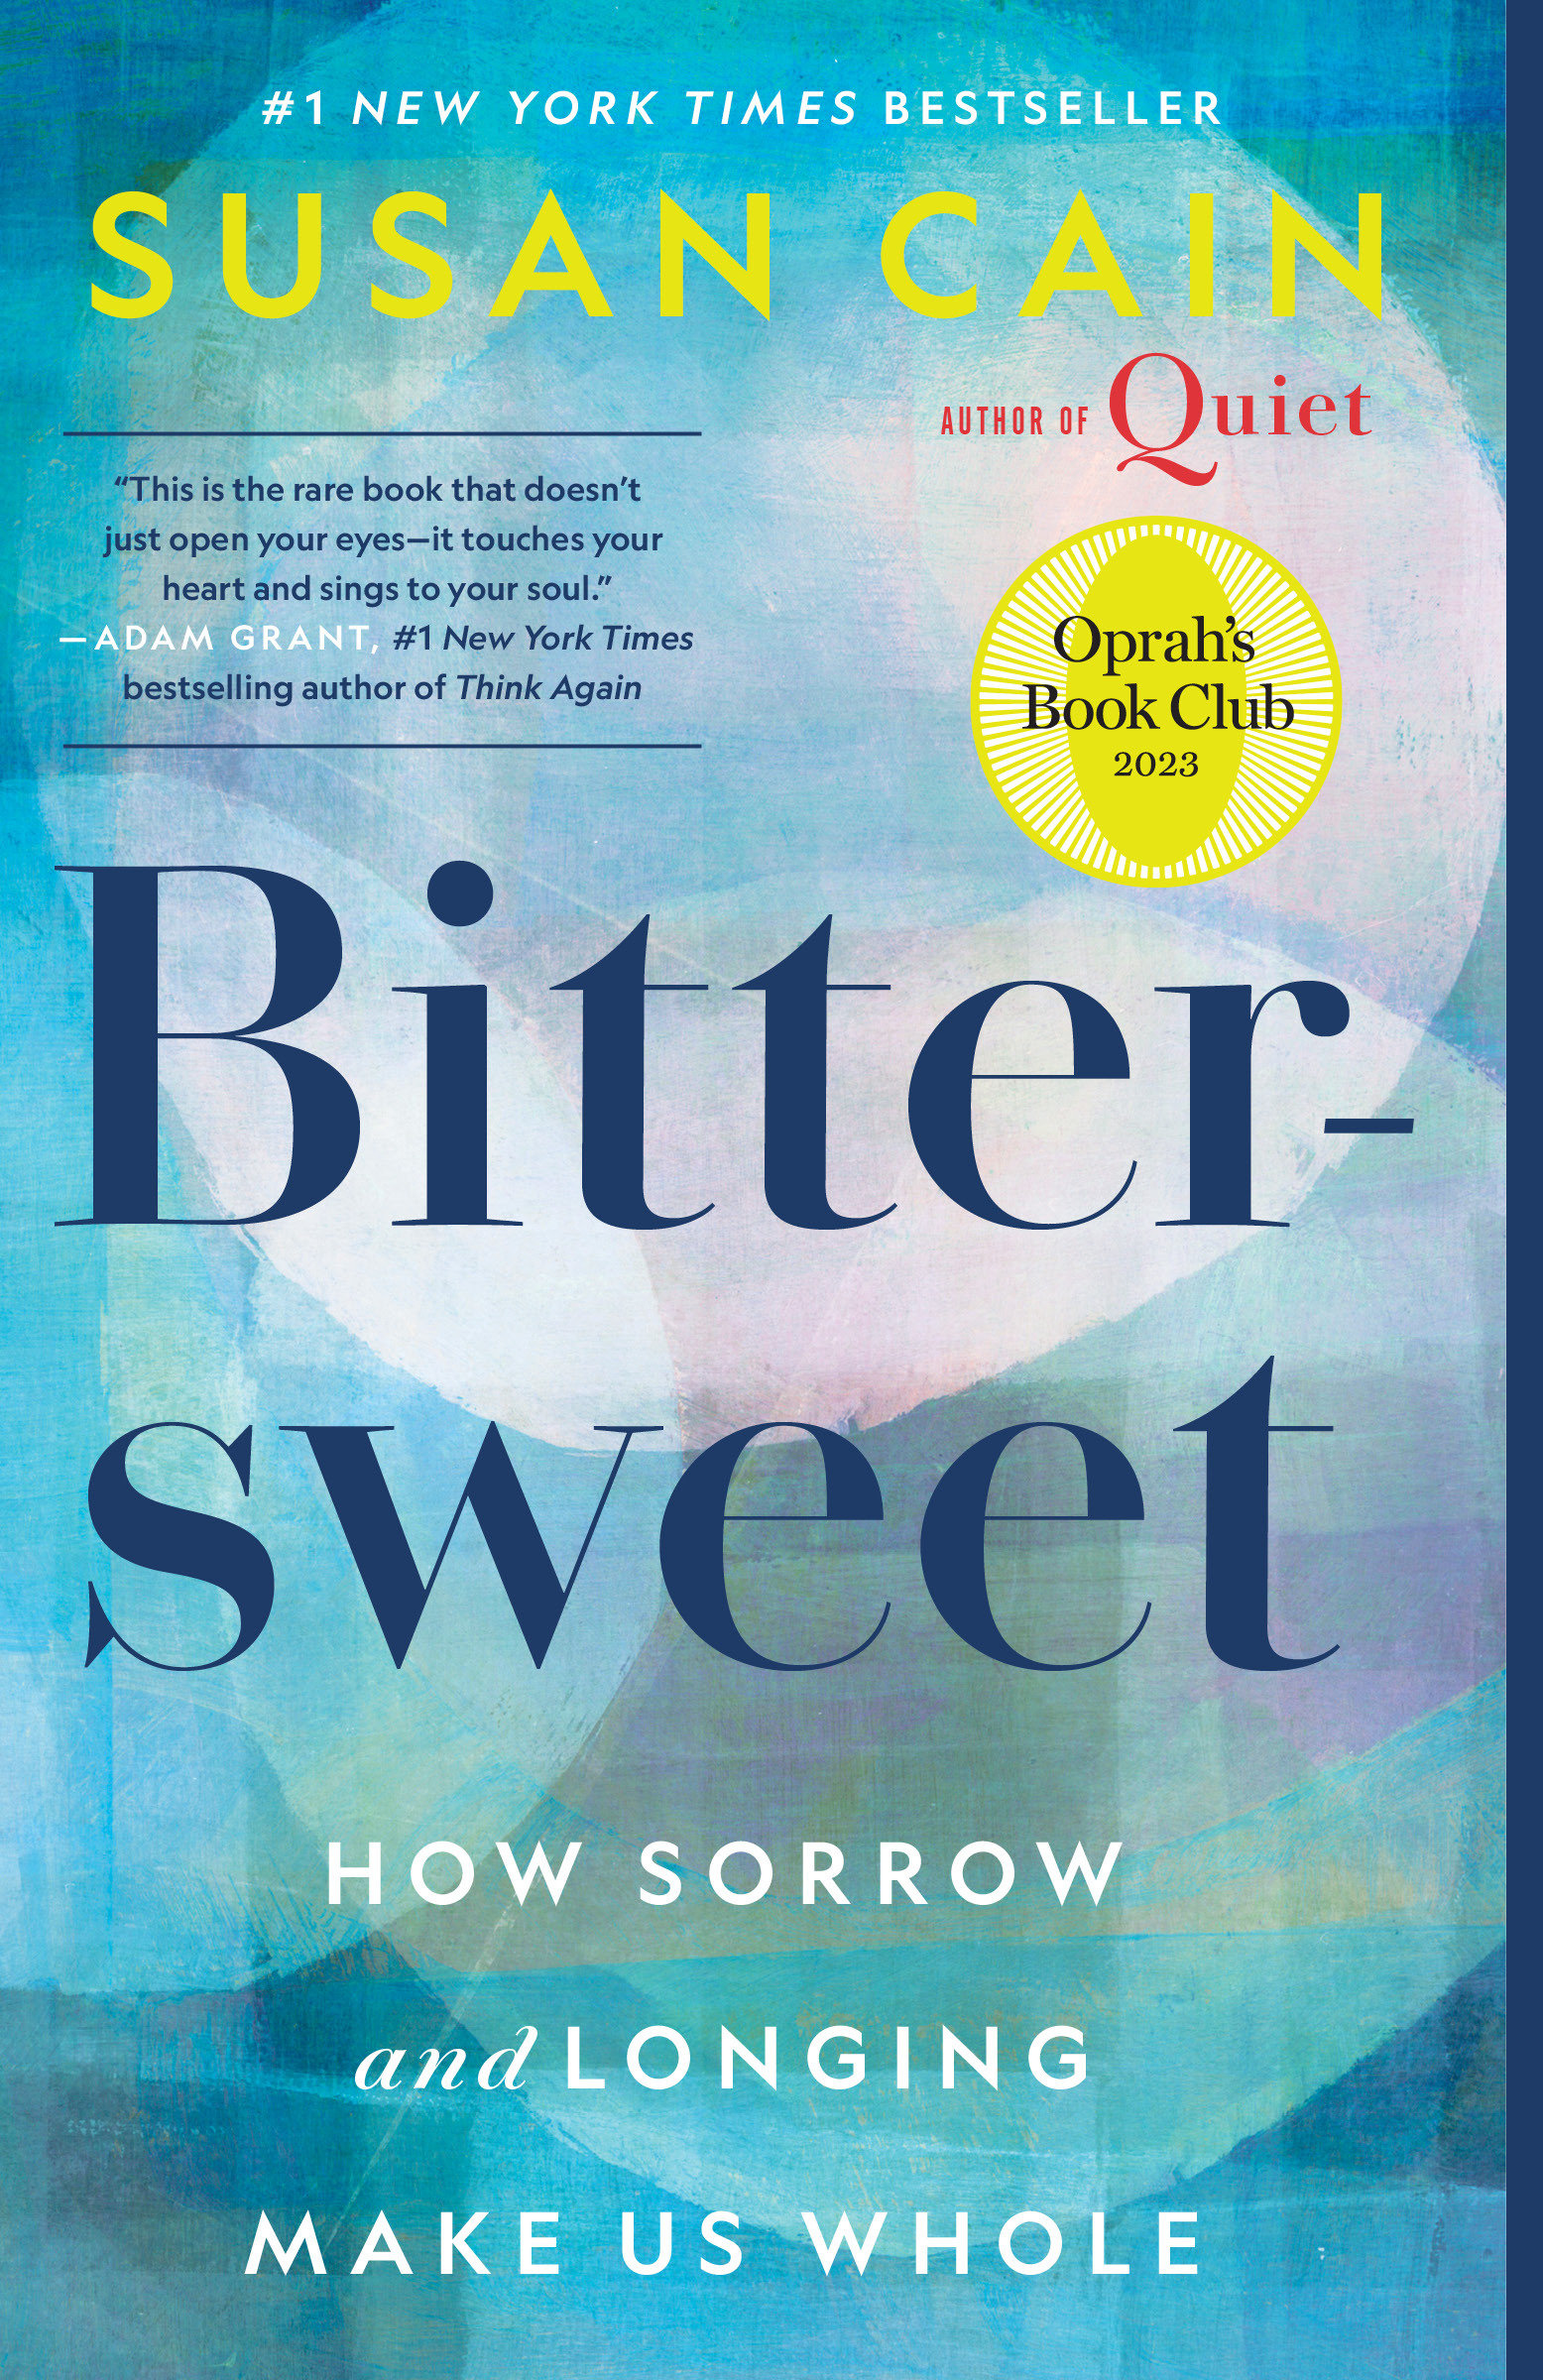 Cover Image of Bittersweet